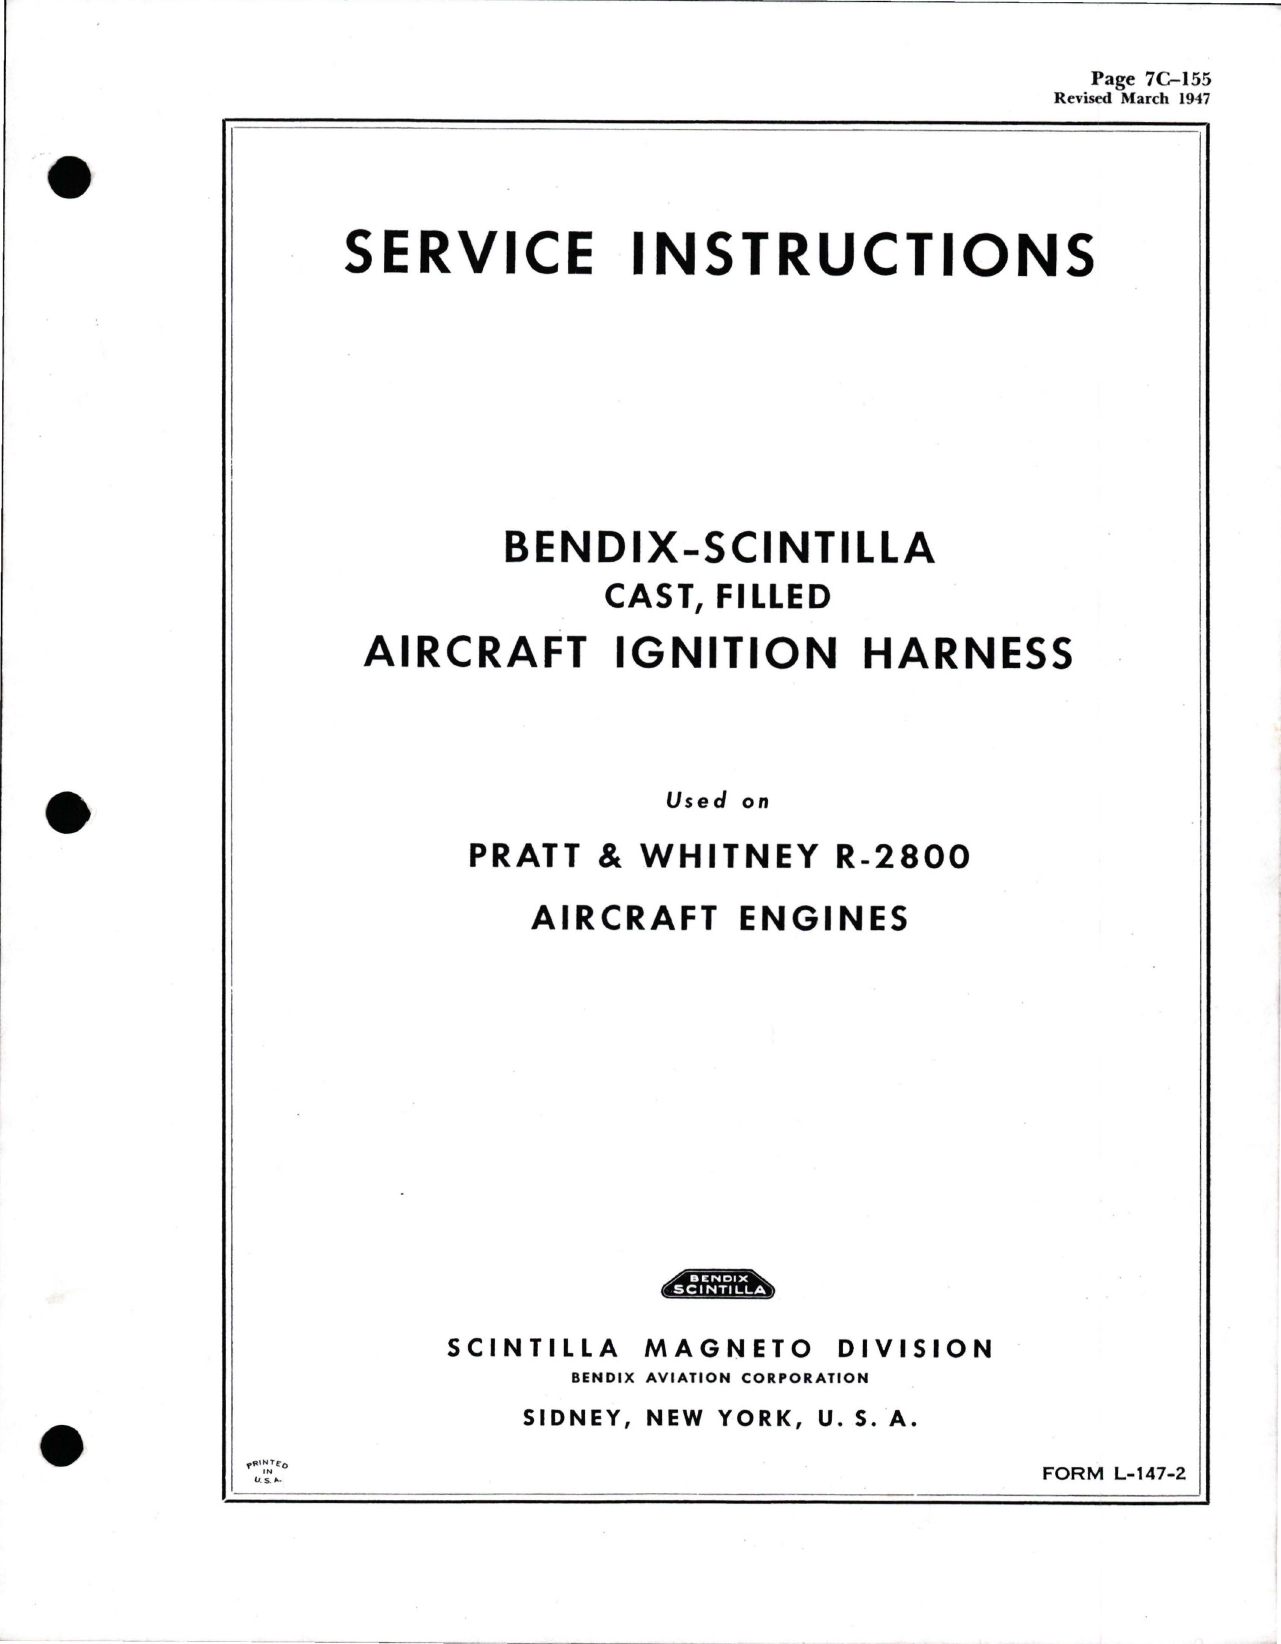 Sample page 1 from AirCorps Library document: Service Instructions for Cast Filled Ignition Harness